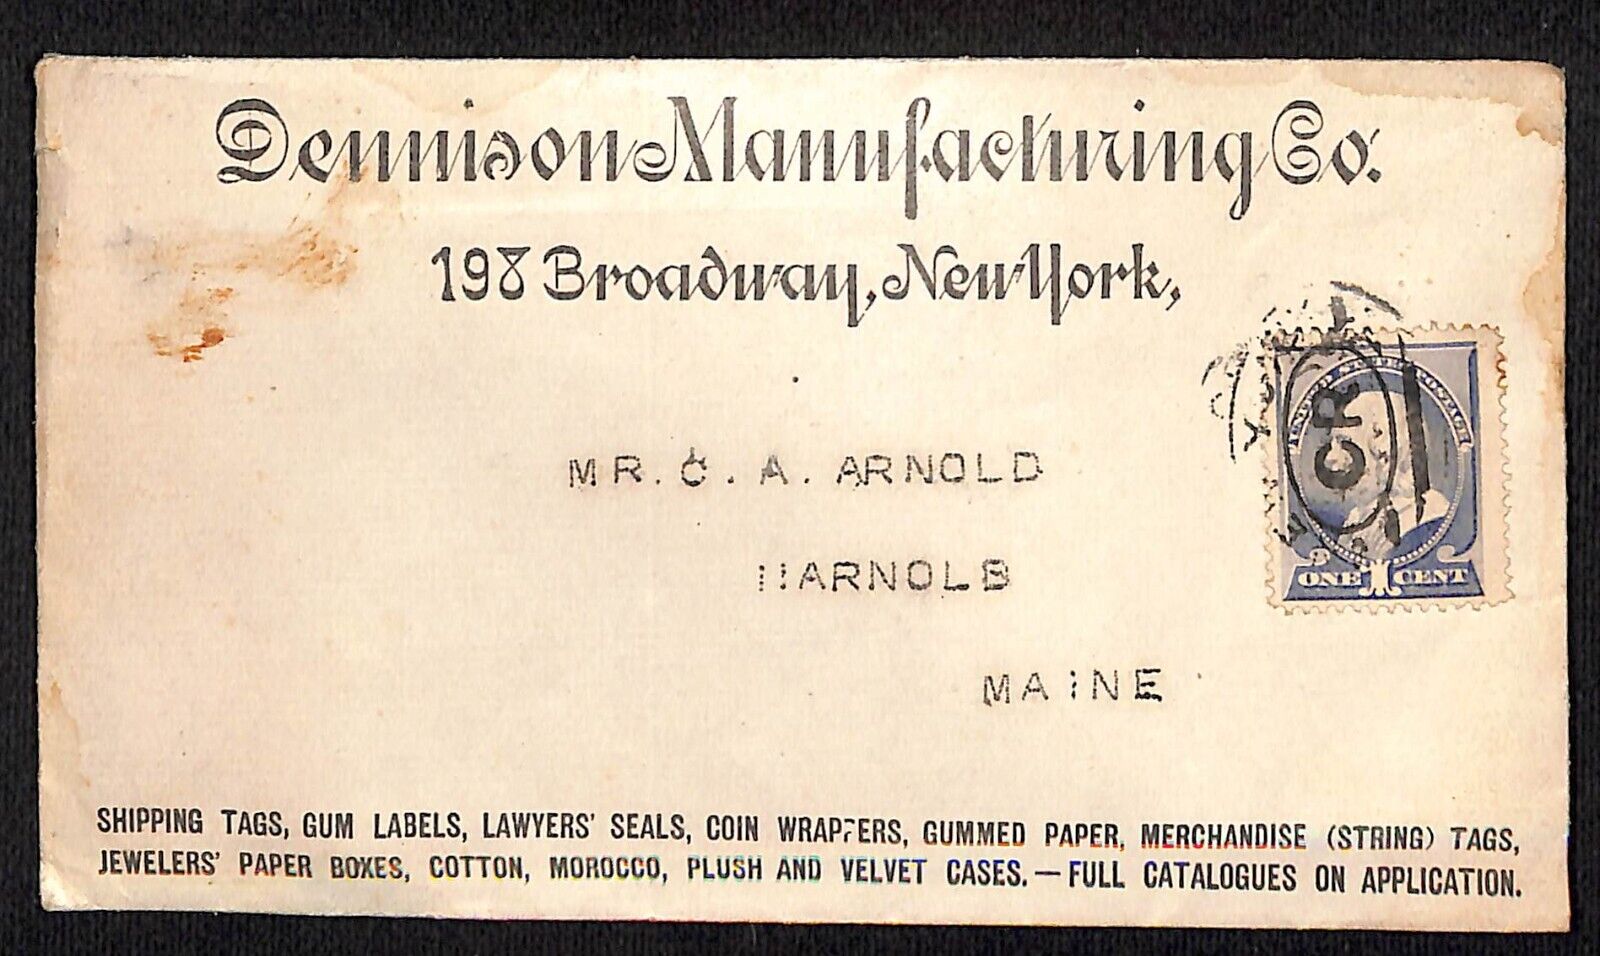 Dennison Manufacturing Broadway New York c1880's-90's Advertising Cover Envelope